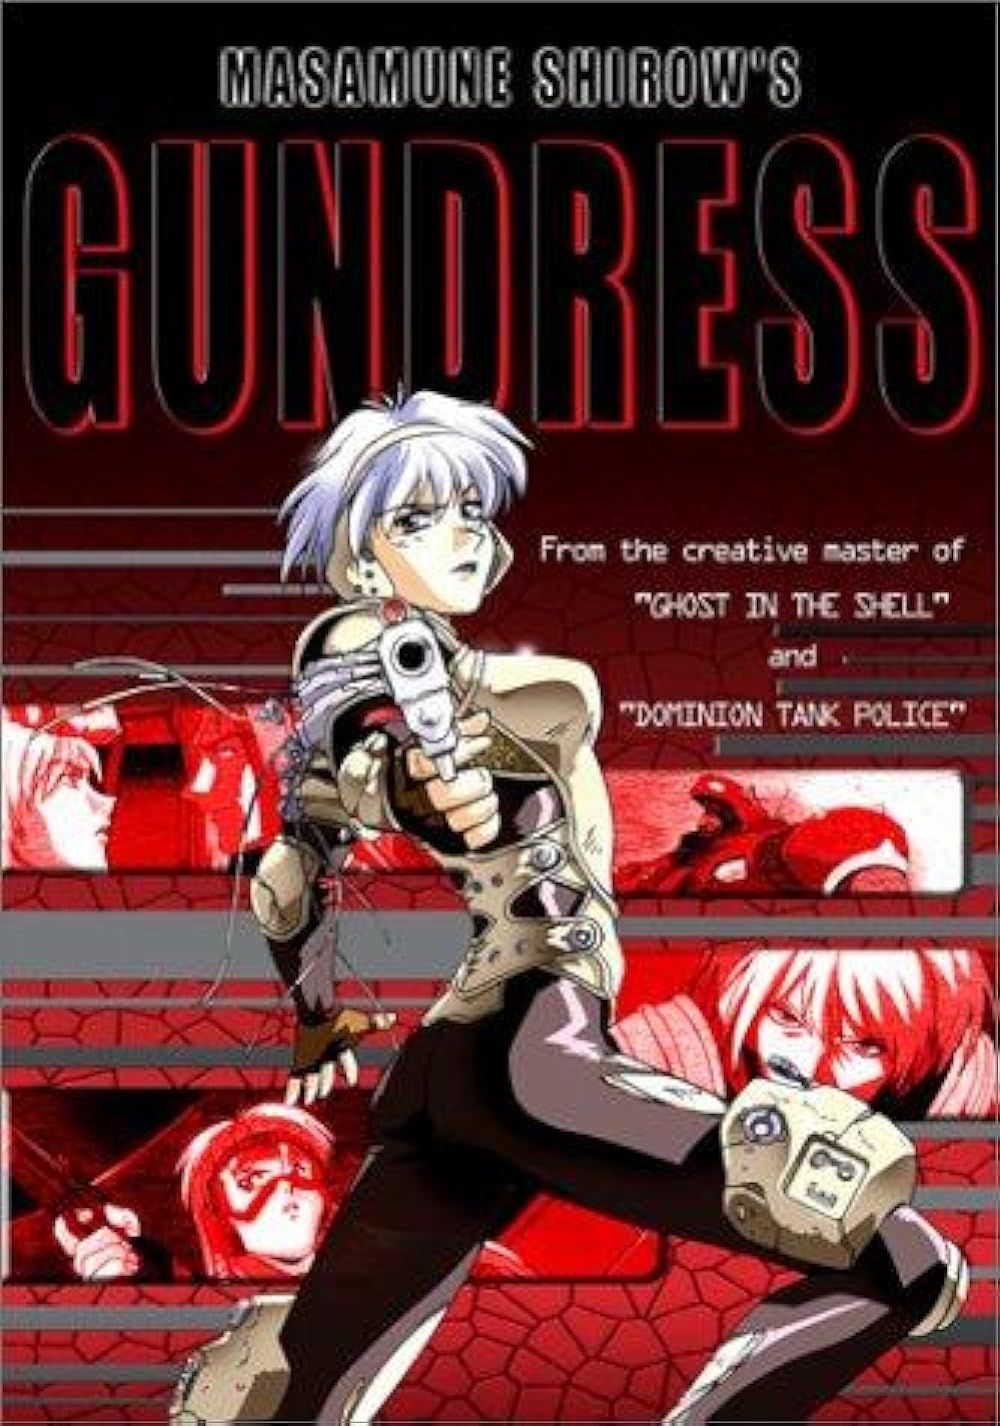 Alissa points a gun towards the reader on the Gundress anime poster